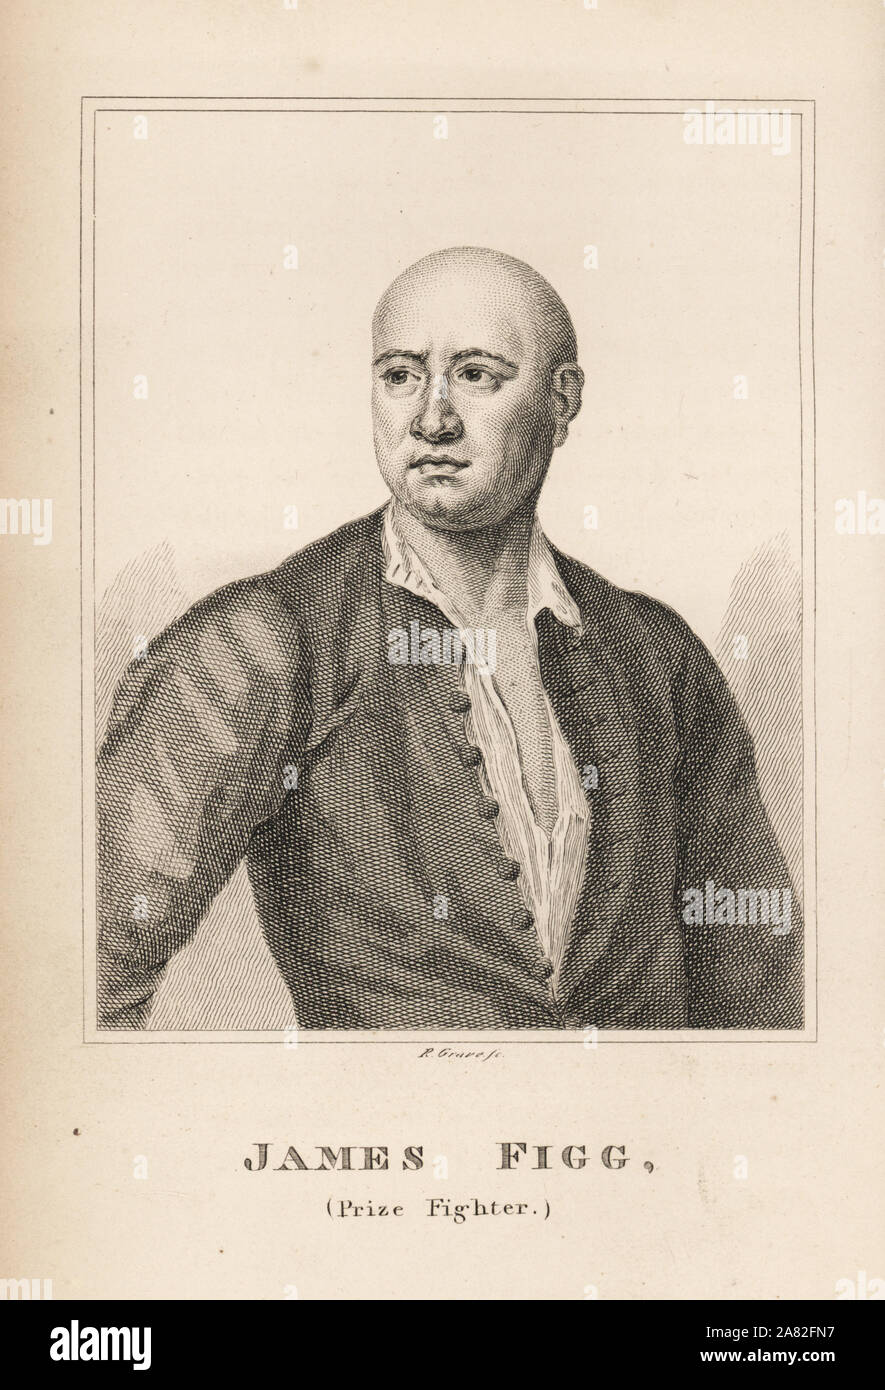 James Figg, prize fighter, boxer, broadsword master, died 1734. Engraving by R. Grave from James Caulfield's Portraits, Memoirs and Characters of Remarkable Persons, London, 1819. Stock Photo